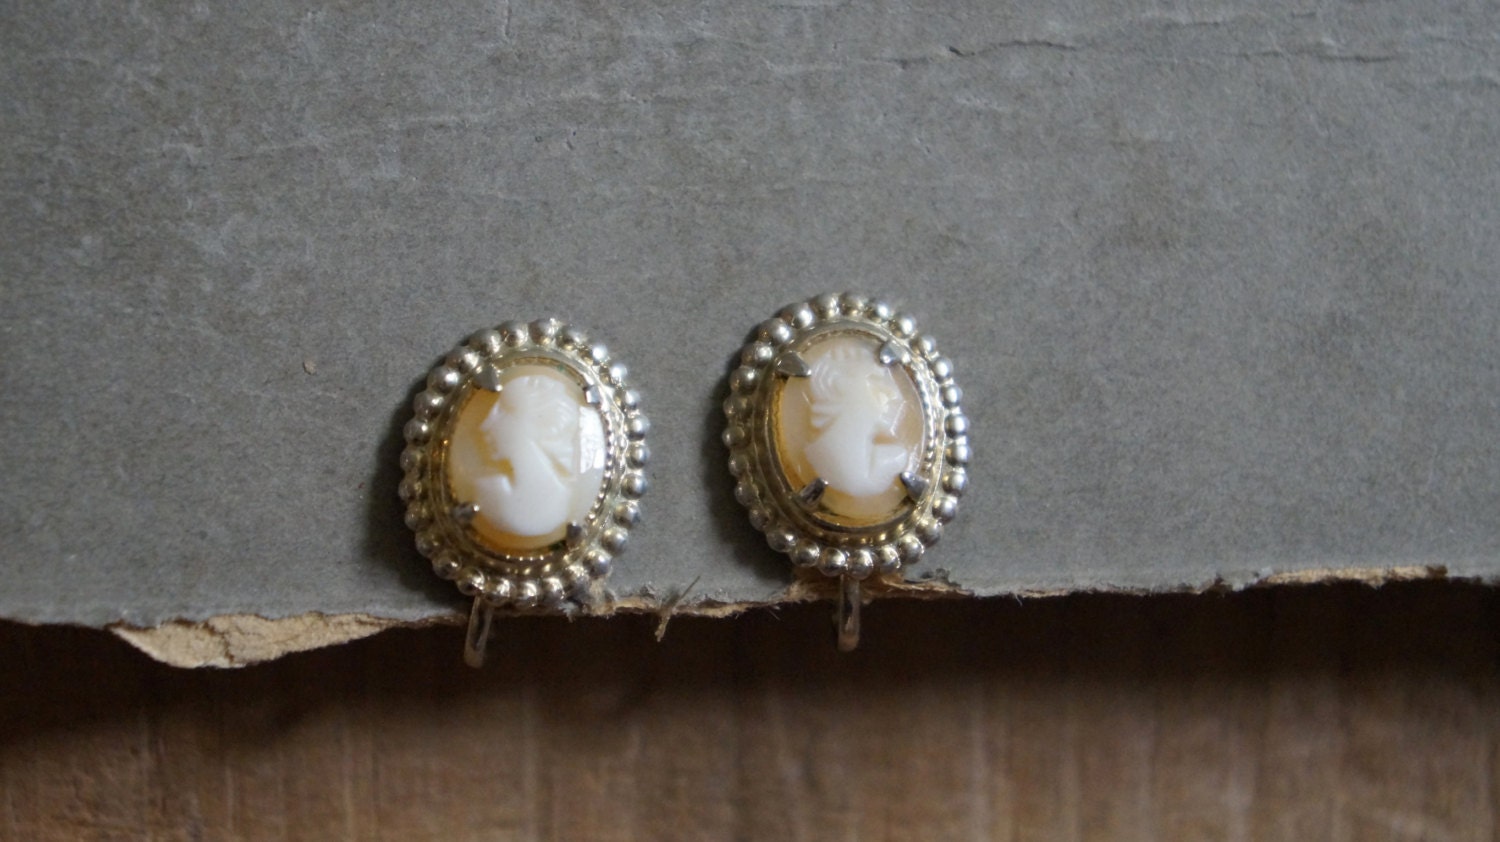 Vintage signed Coro cameo screw back earrings Glass carved